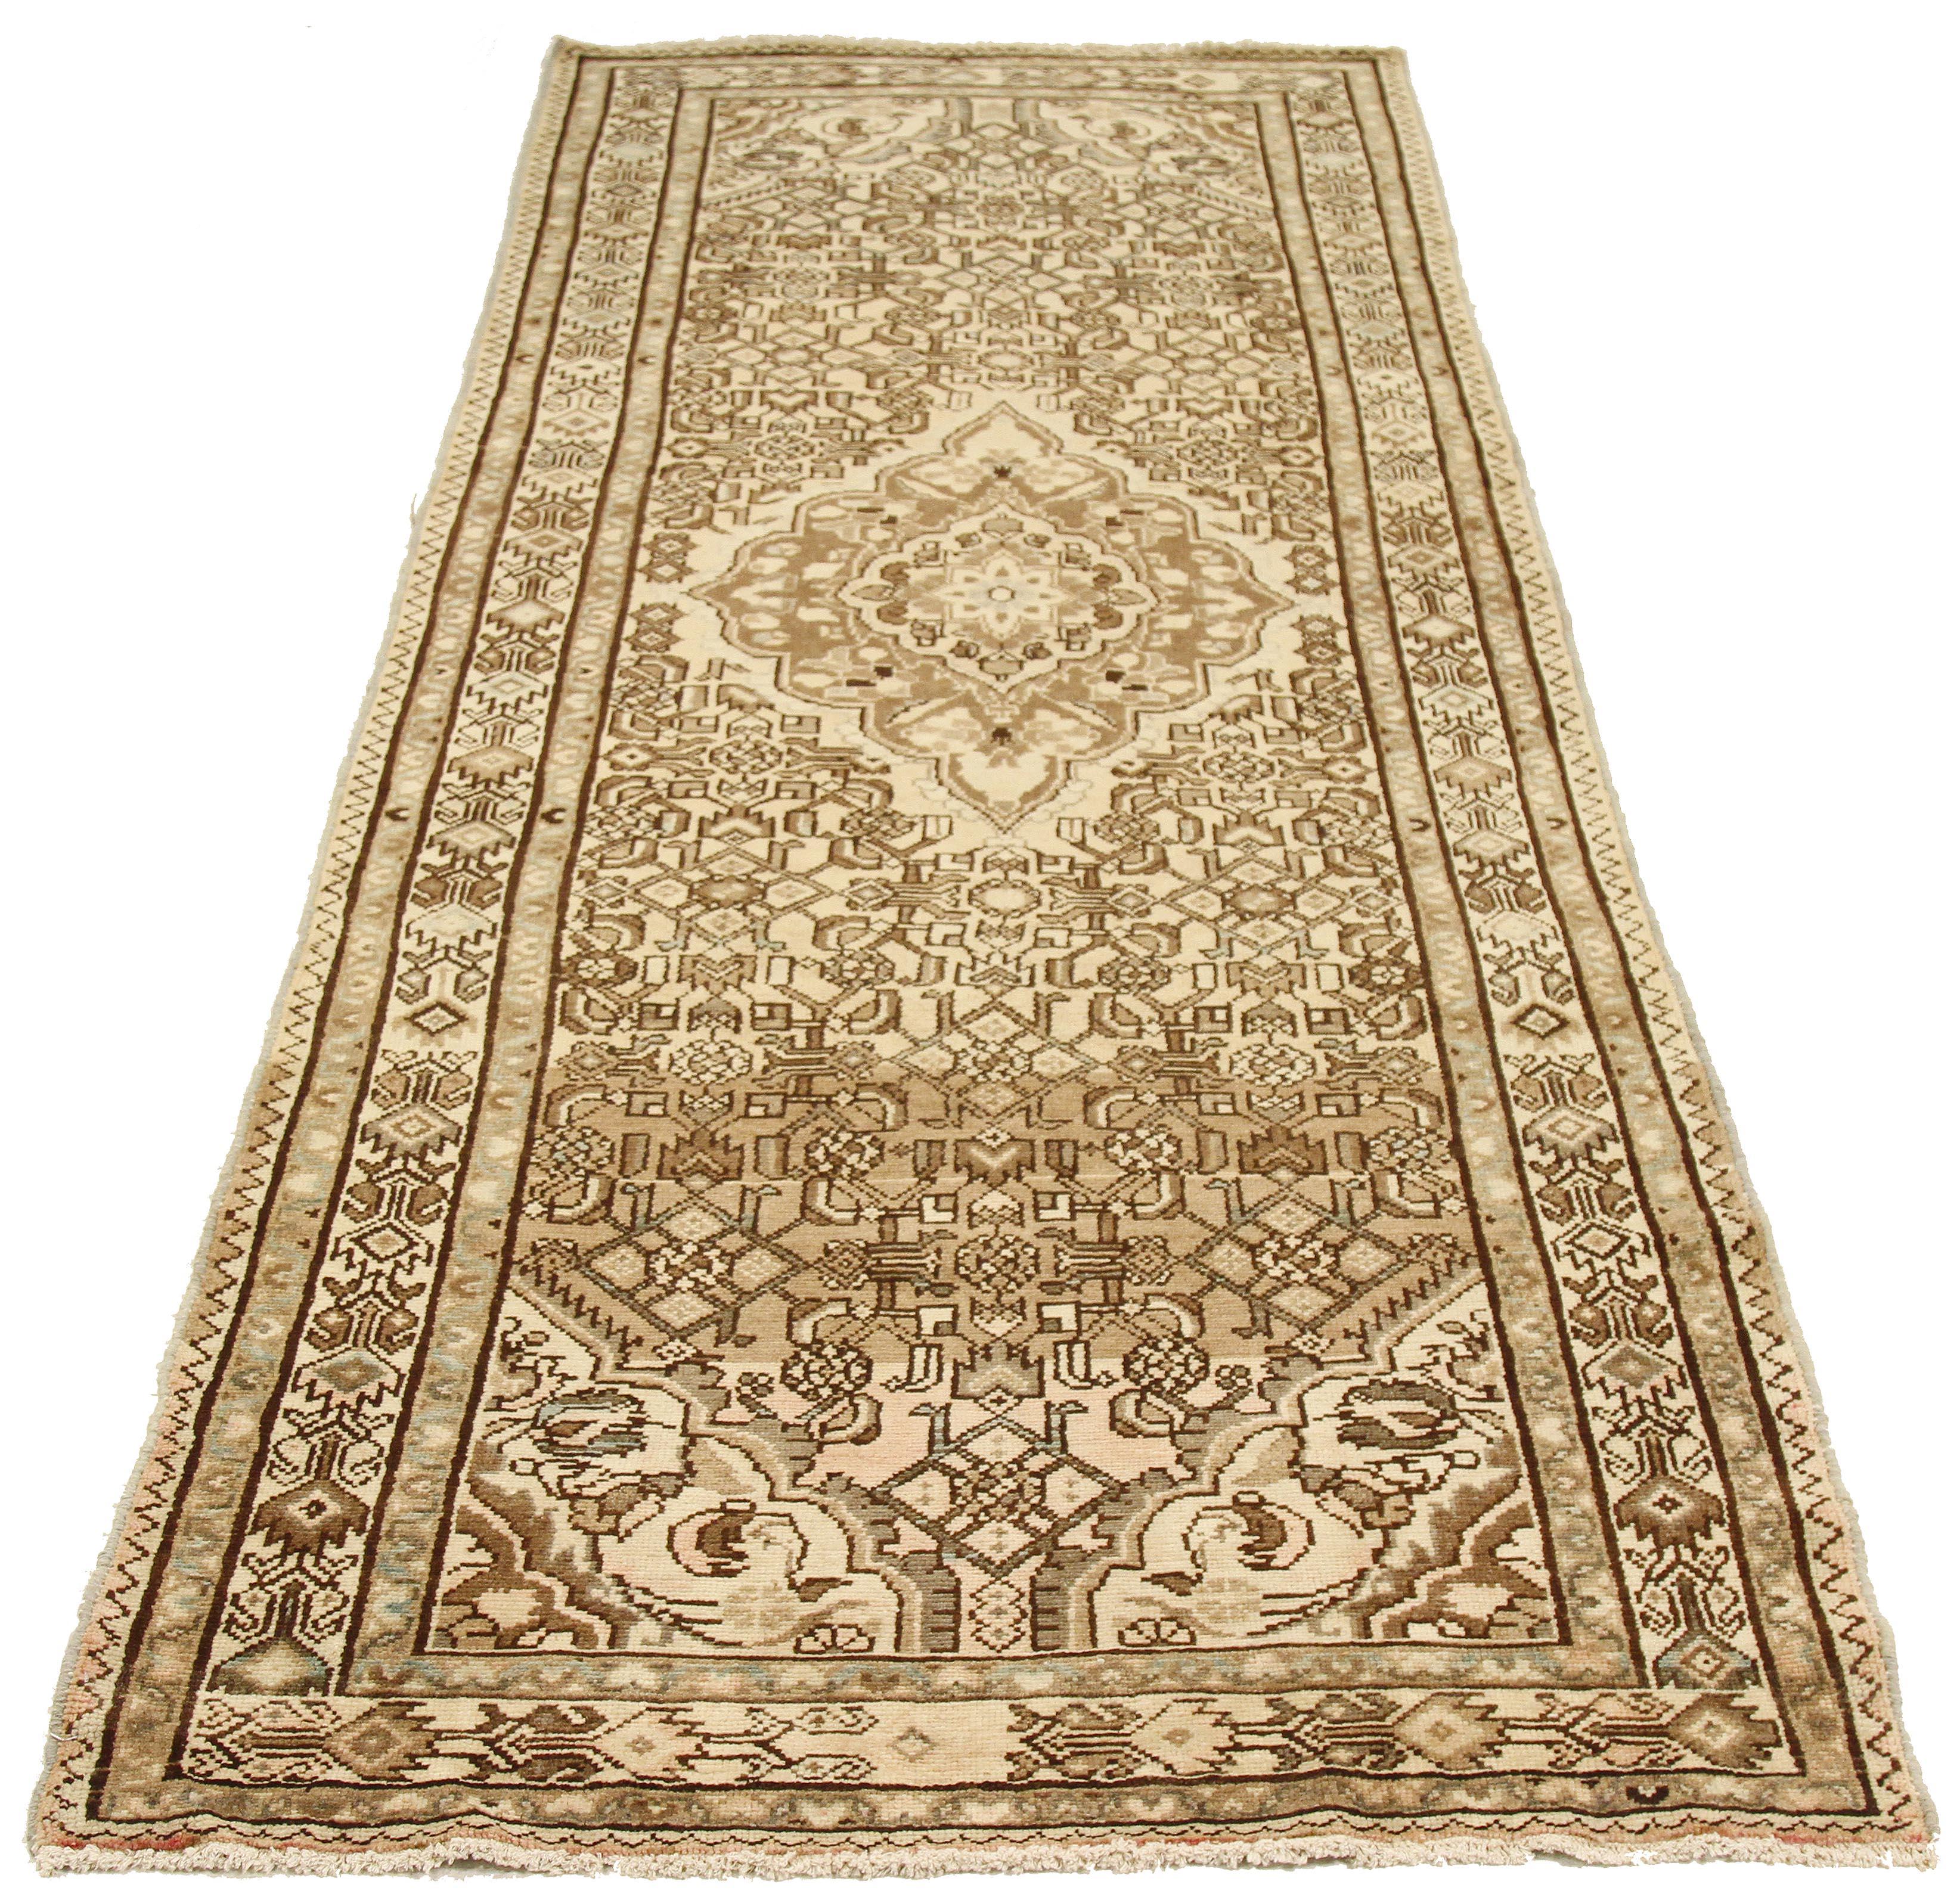 Antique Persian runner rug handwoven from the finest sheep’s wool and colored with all-natural vegetable dyes that are safe for humans and pets. It’s a traditional Malayer design featuring brown and gray floral details over an ivory field. It’s a